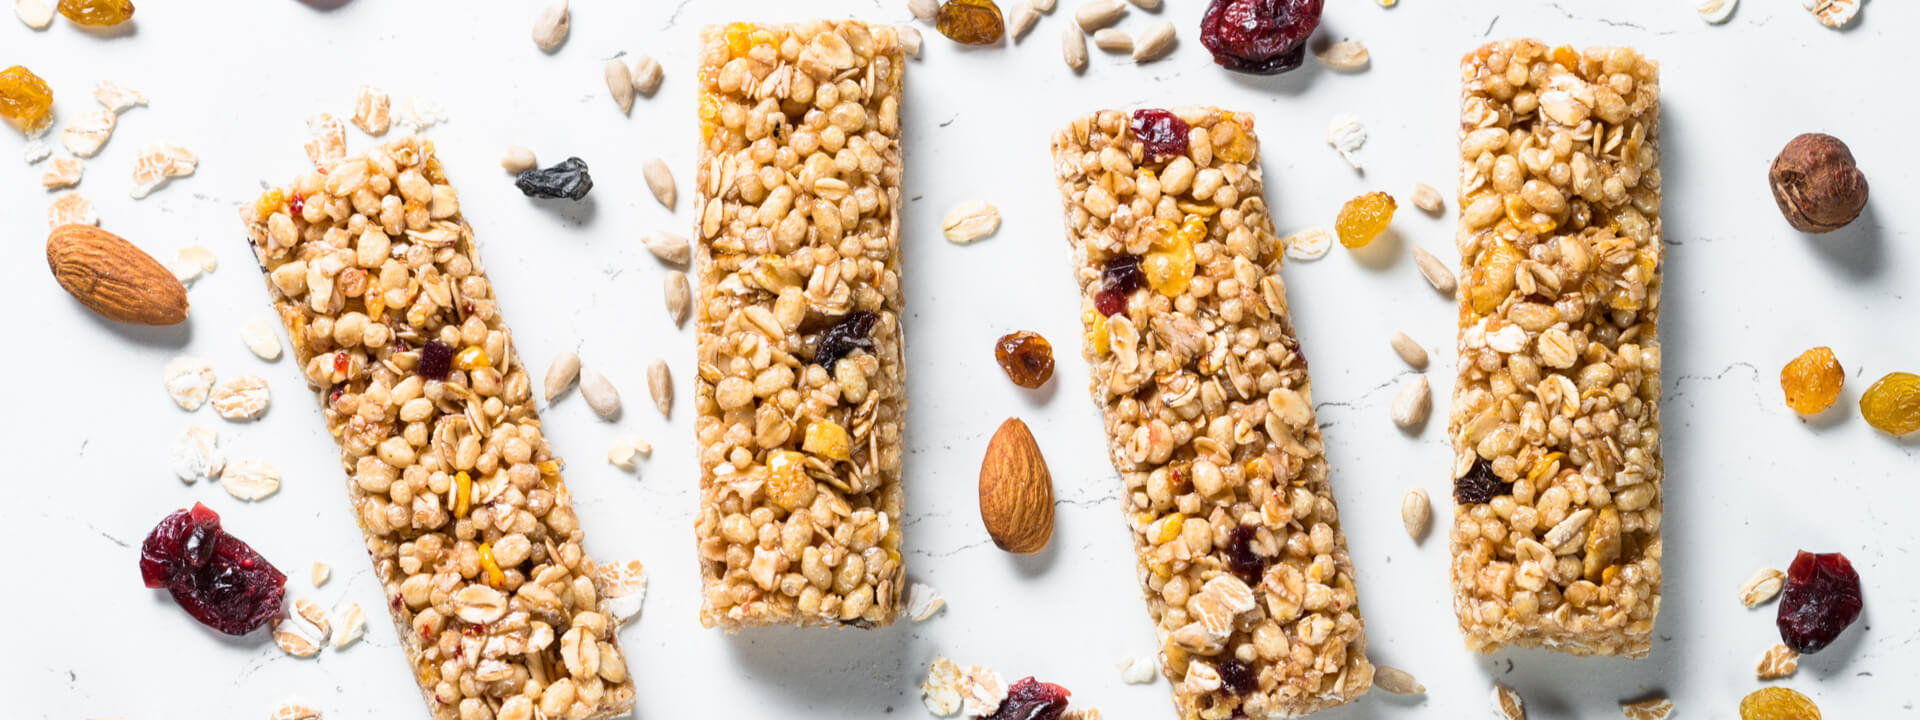 Are Protein Bars Healthy for You?